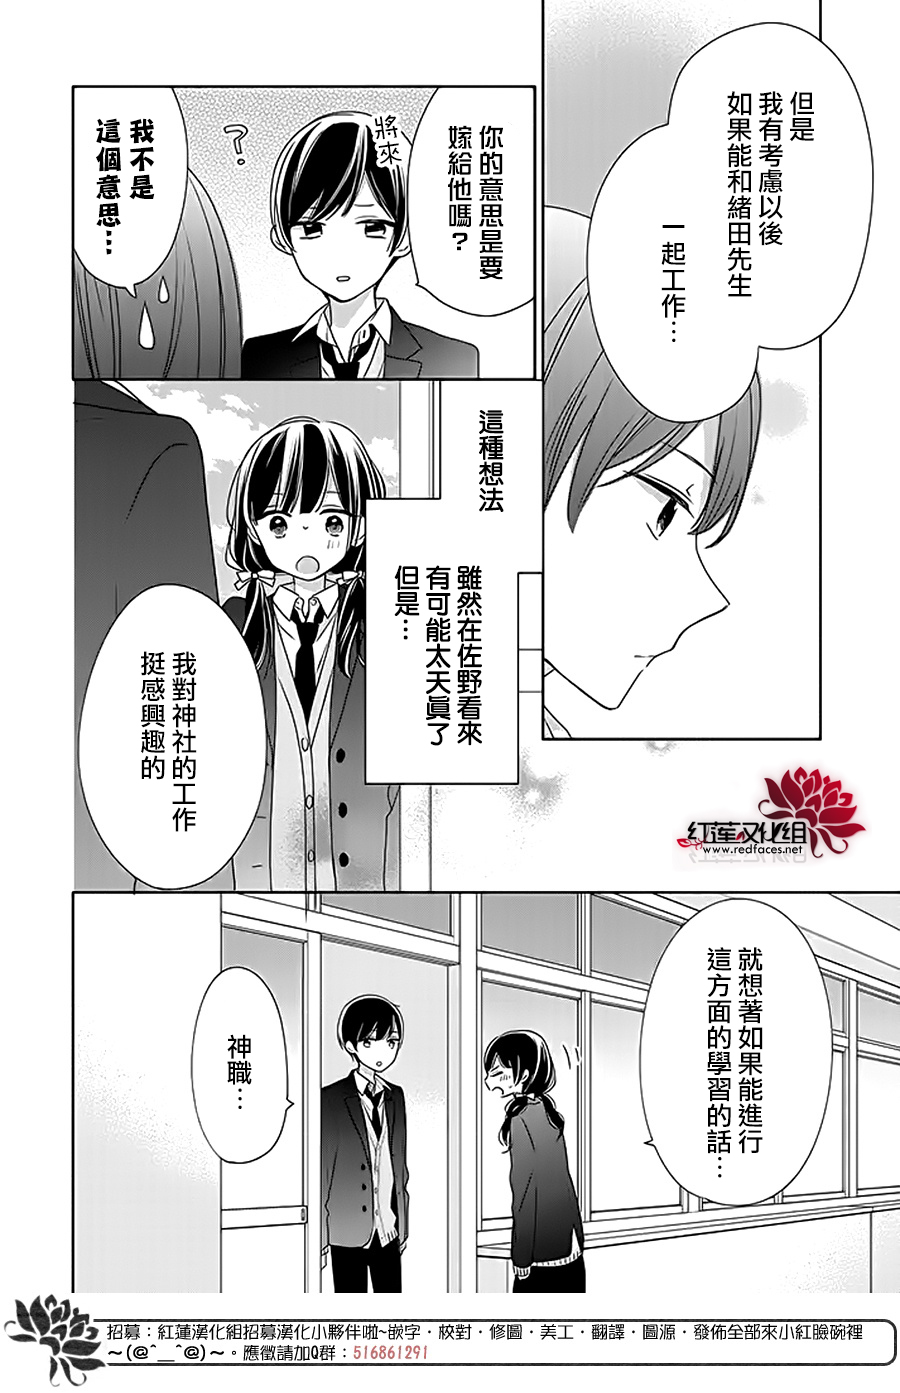 If given a second chance - 第33話 - 6